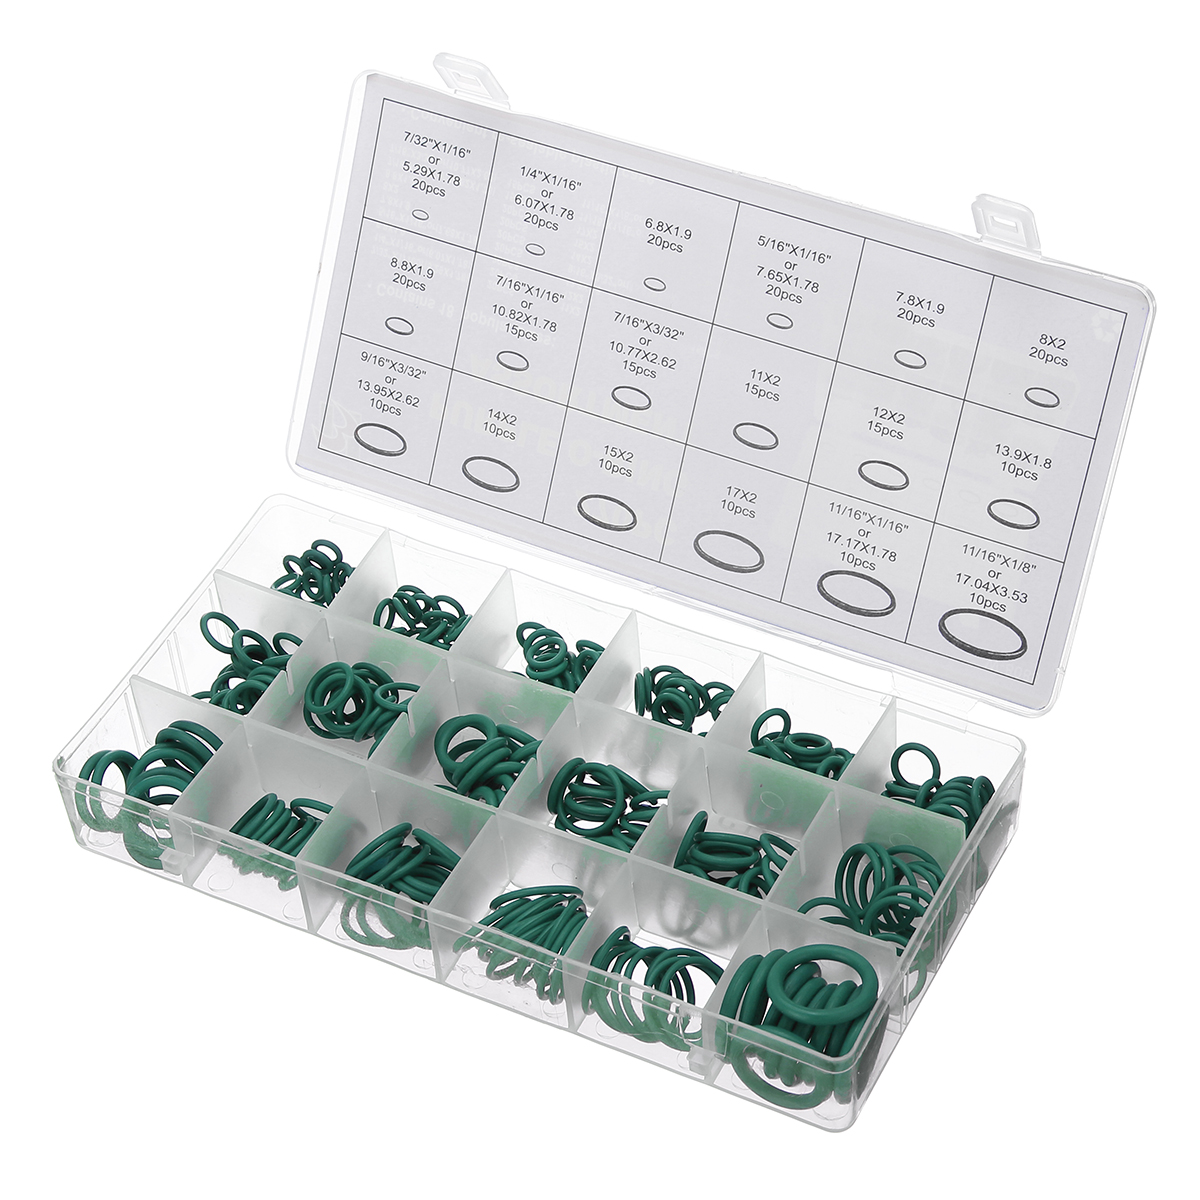 

270pcs 18 Sizes O Ring Hydraulic Nitrile Seals Green Rubber O Ring Assortment Kit